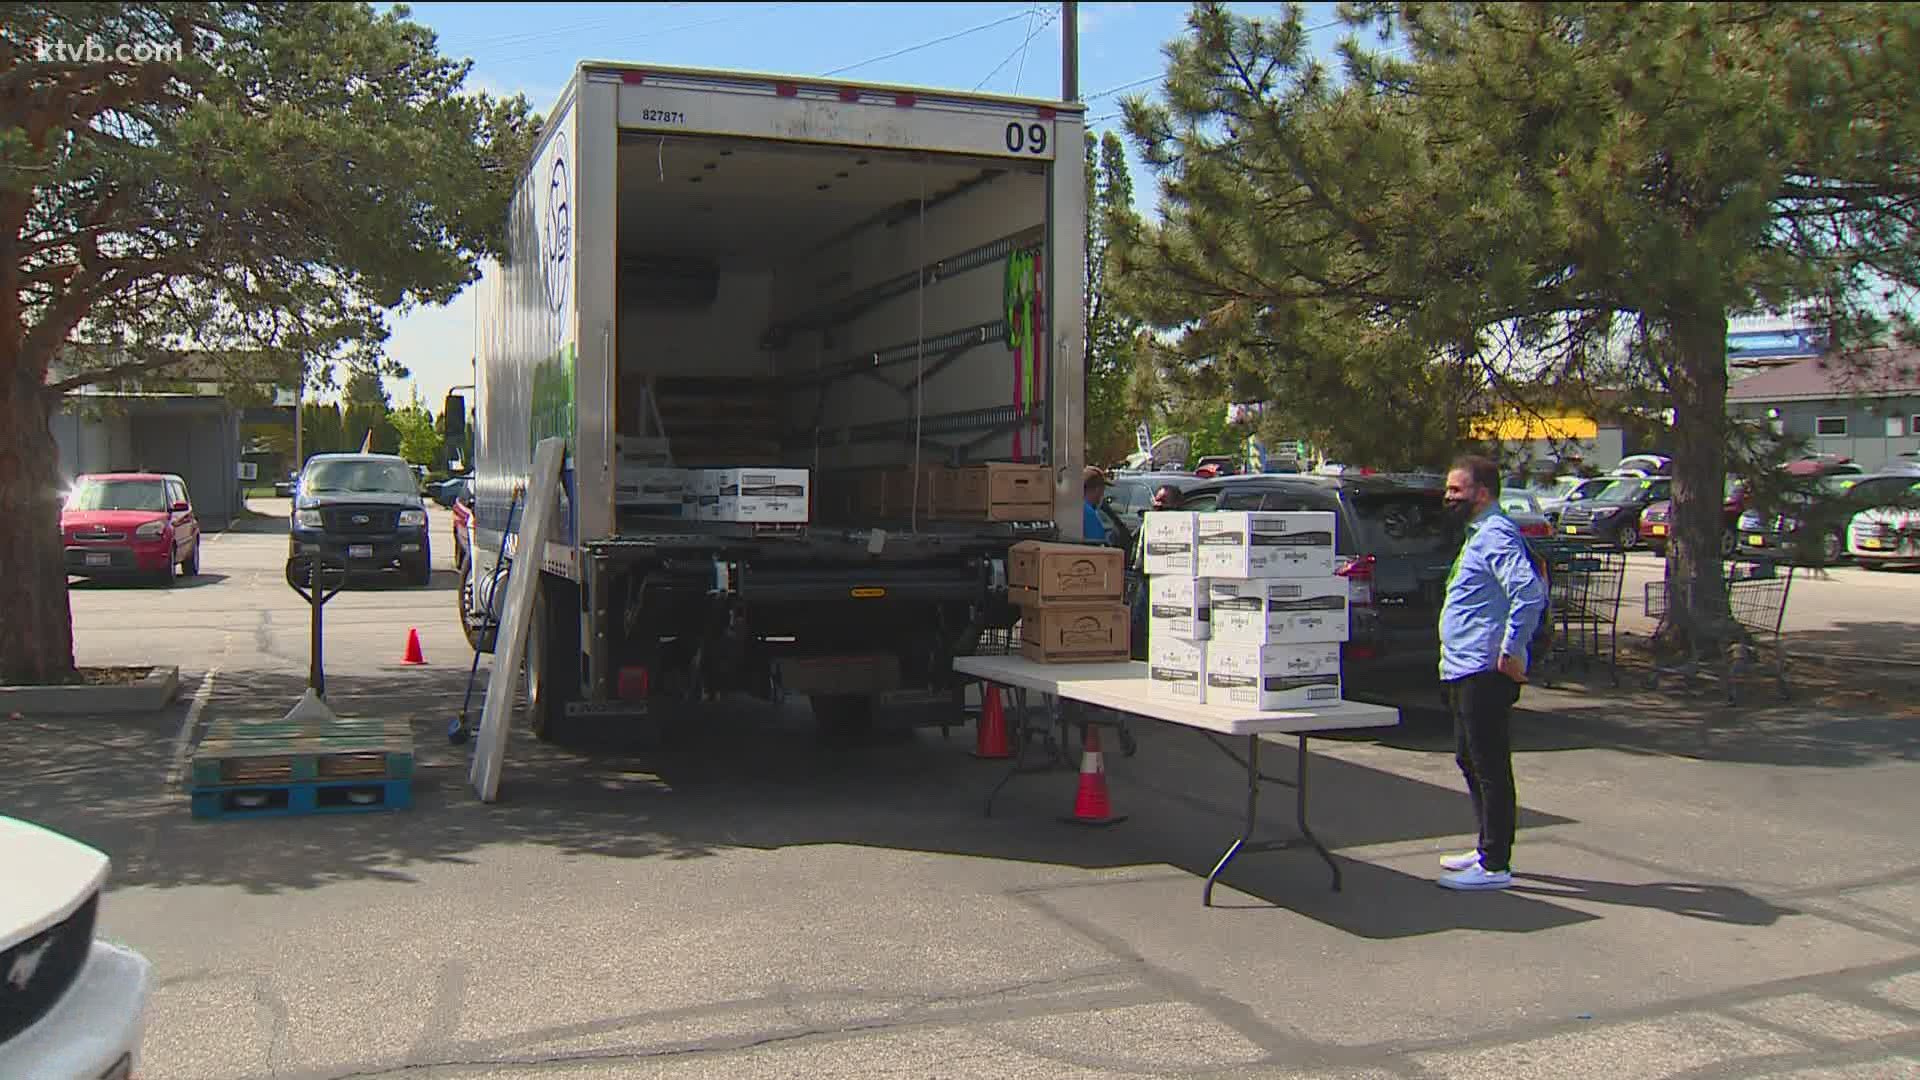 In celebration of Idaho Gives, a mobile food pantry with boxes of staple grocery items was available for anyone in need.